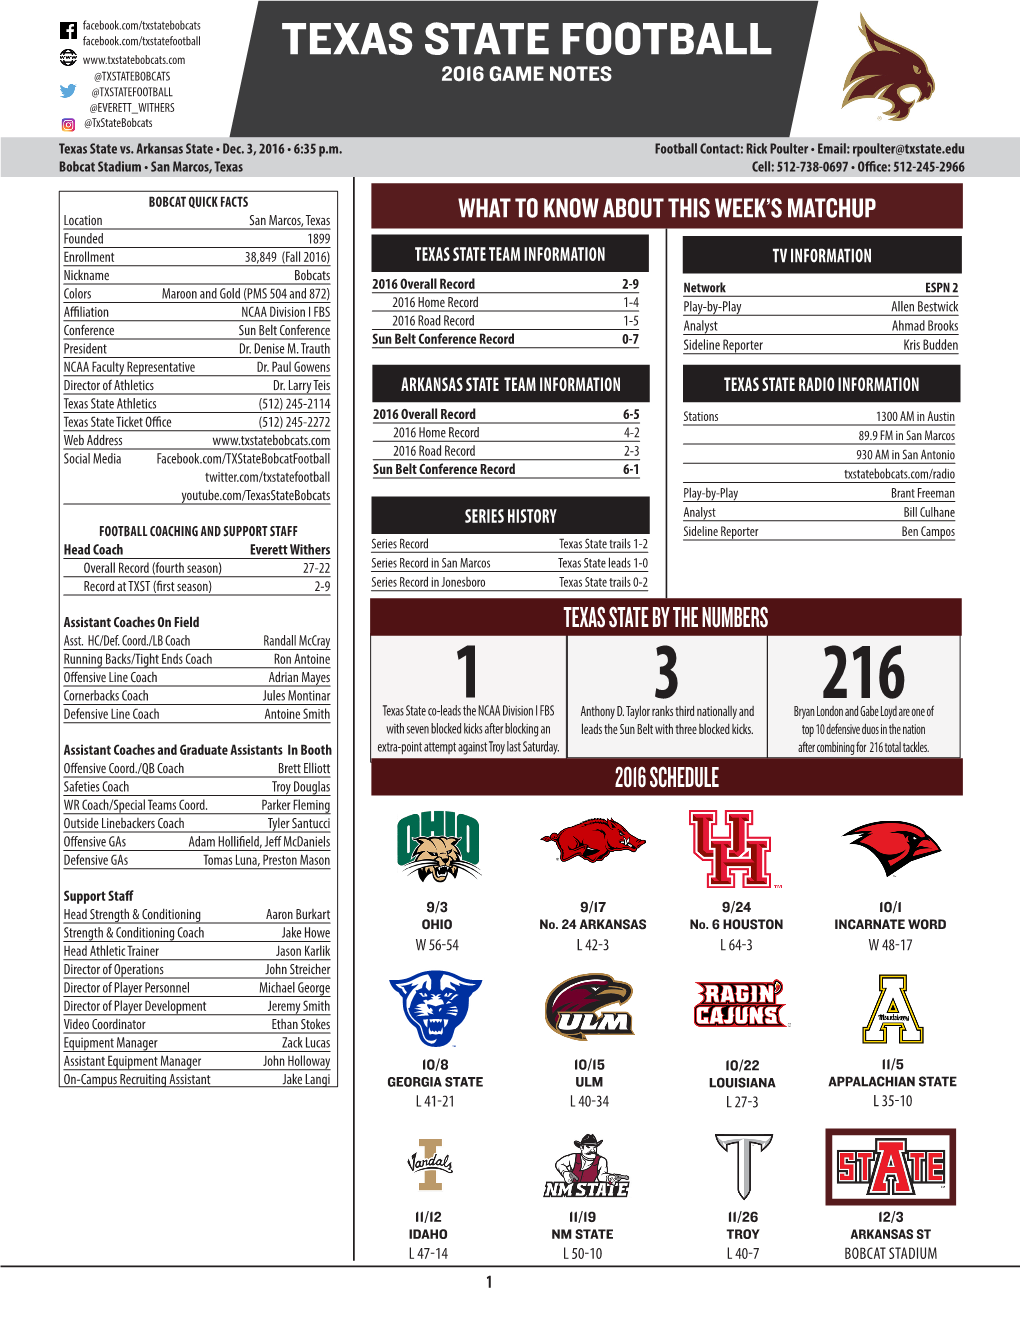 TEXAS STATE FOOTBALL @TXSTATEBOBCATS 2016 GAME NOTES @TXSTATEFOOTBALL @EVERETT WITHERS @Txstatebobcats Texas State Vs